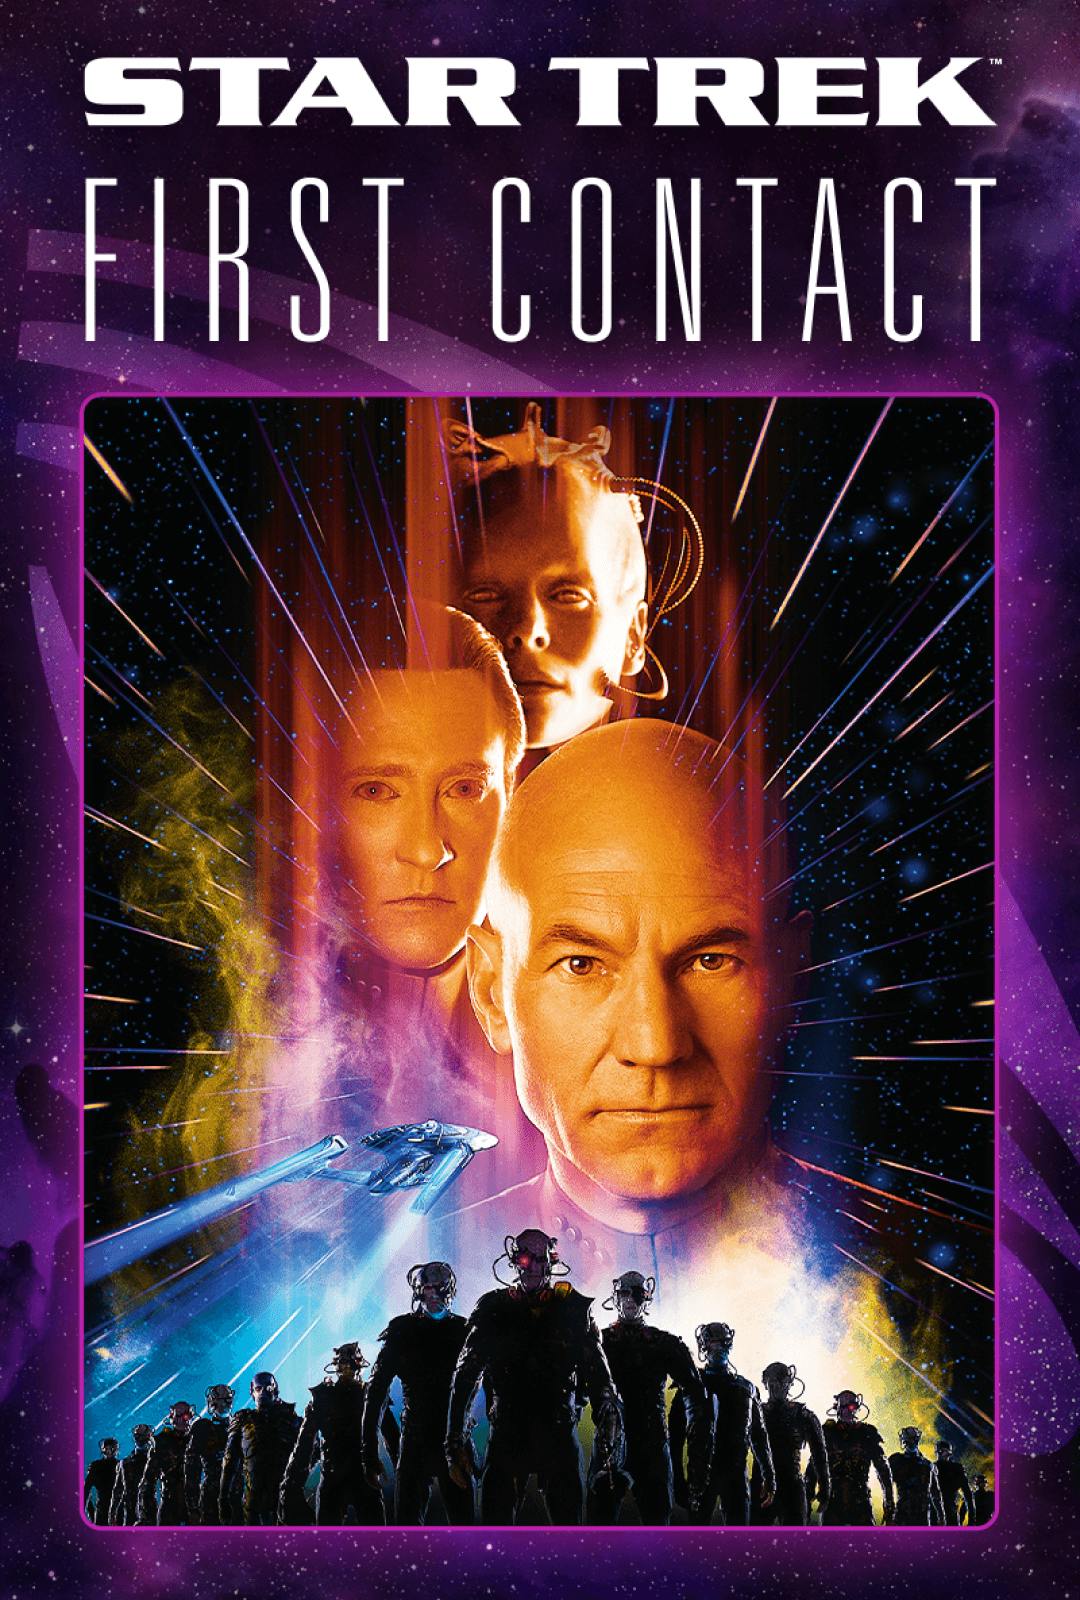 Poster art for Star Trek: First Contact featuring Jean-Luc Picard, Data and the Borg Queen